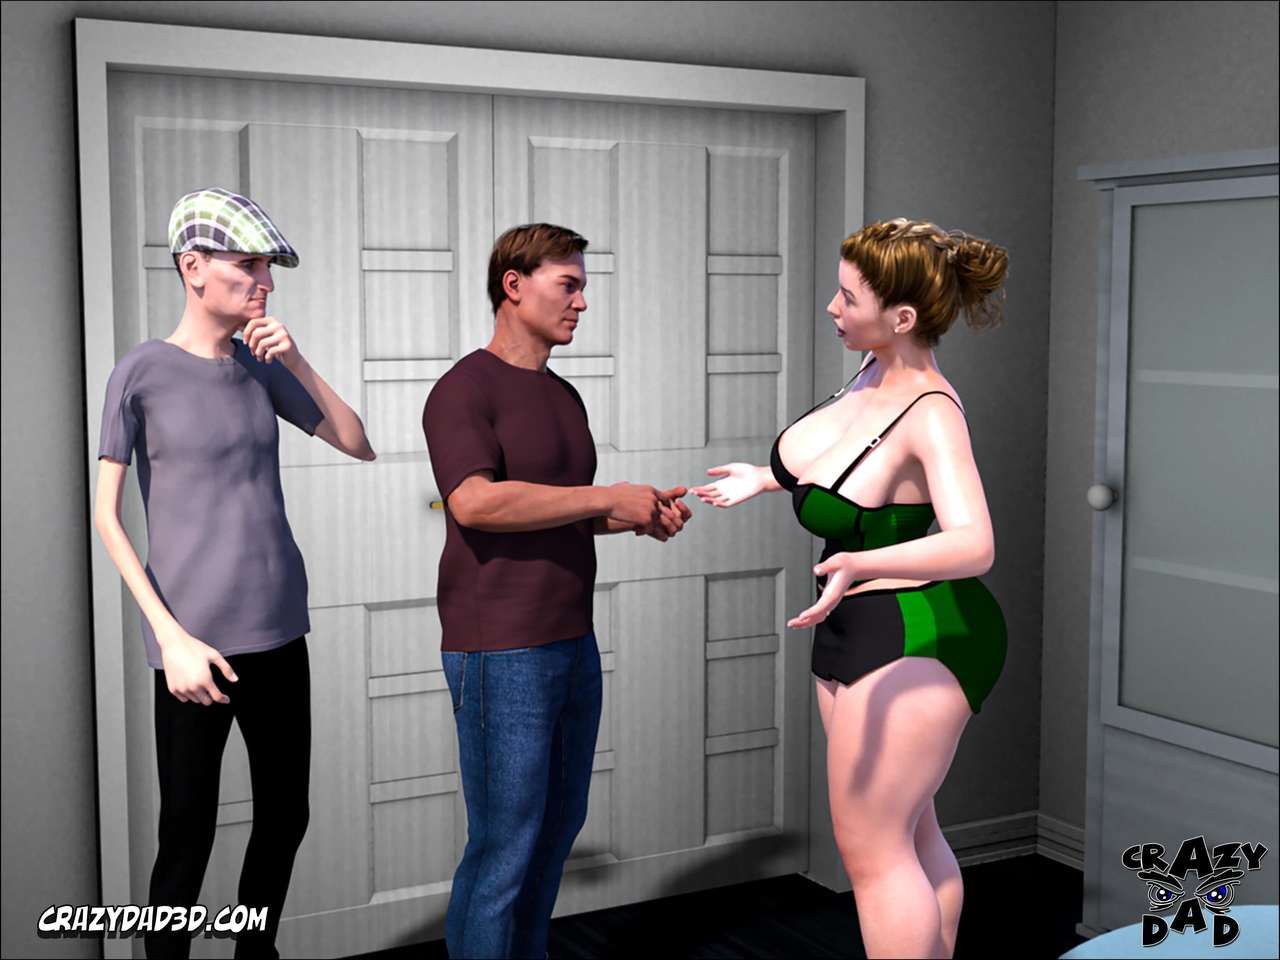 Father-in-law at home 19 [Crazydad3d.com] 8